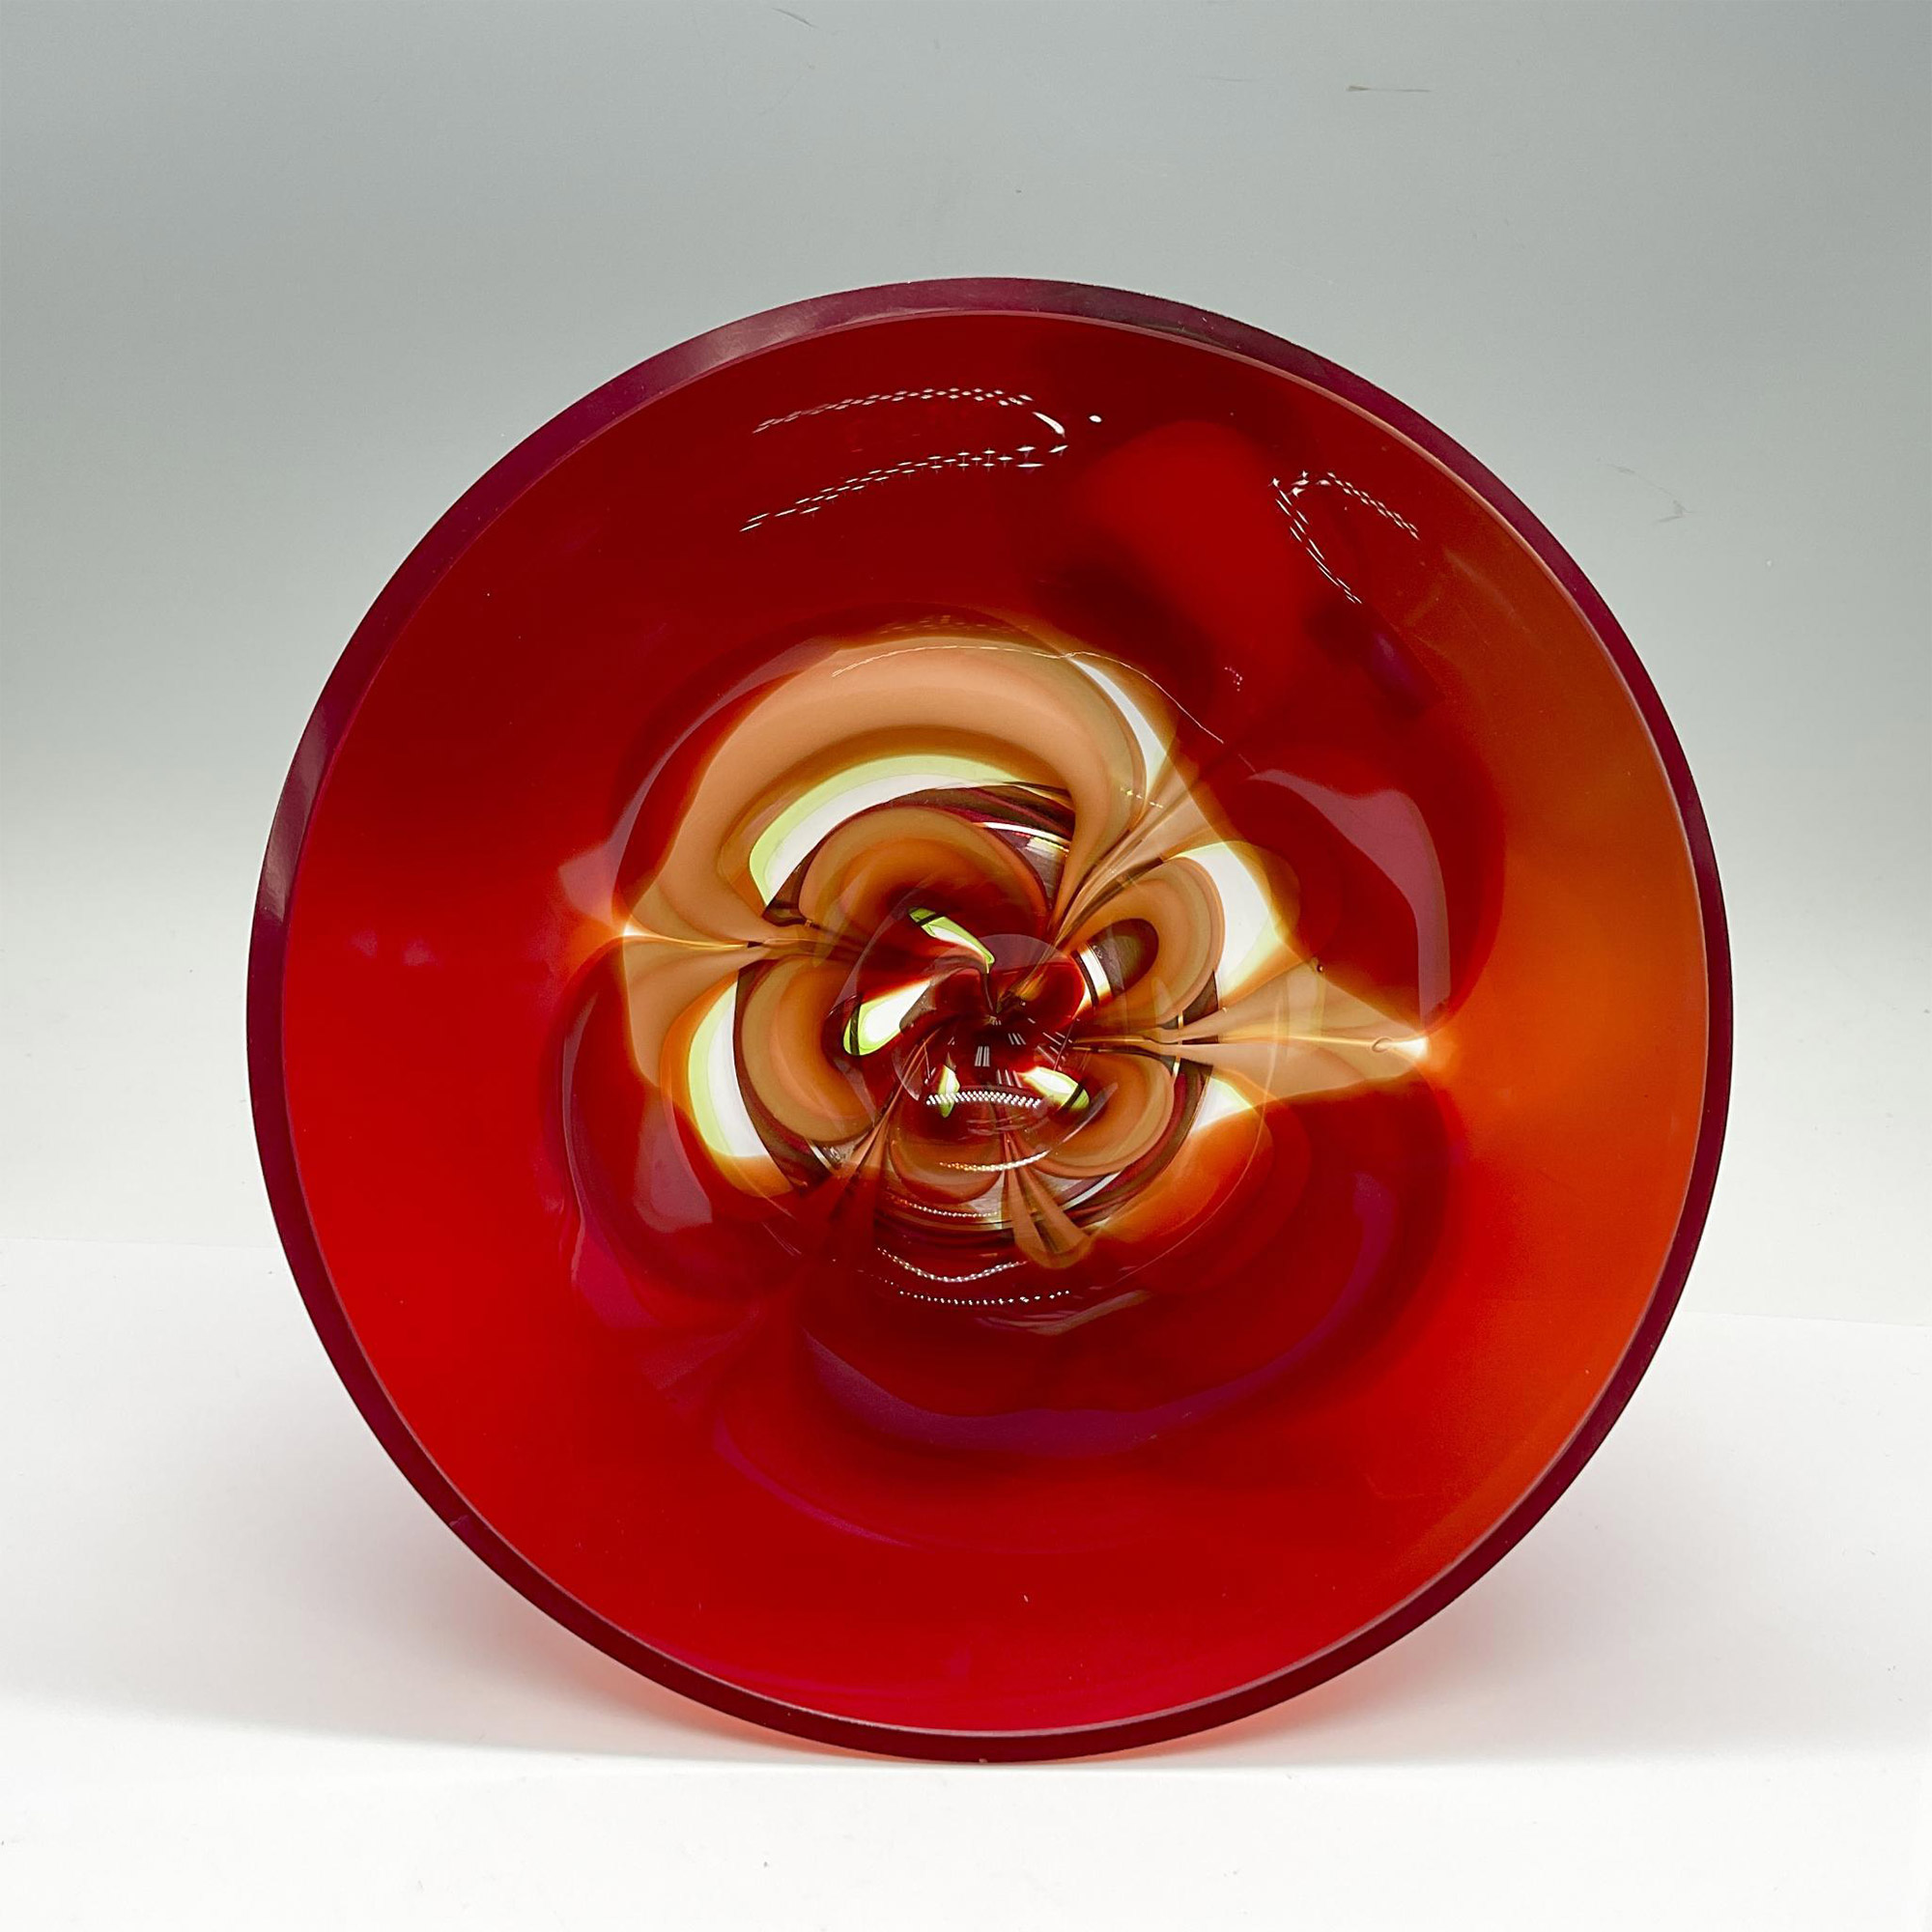 Waterford Red and Amber Glass Vase, Evolution - Image 3 of 4